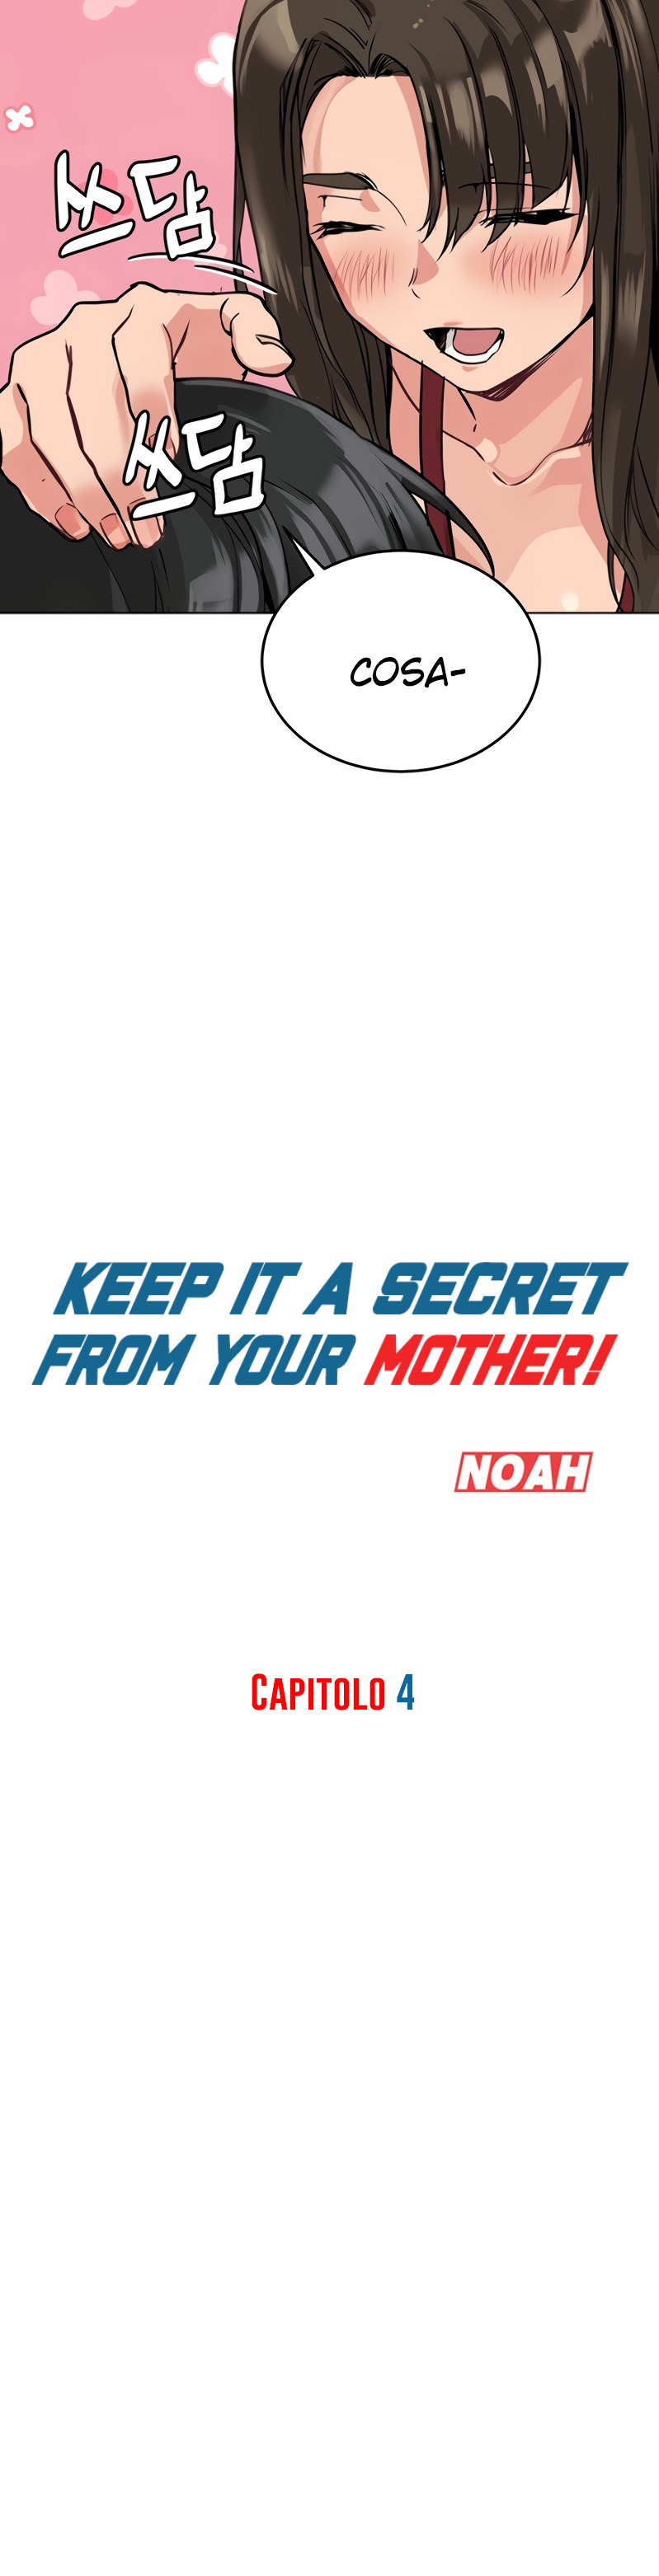 Keep It a Secret From Your Mother capitolo 04 - Page 11